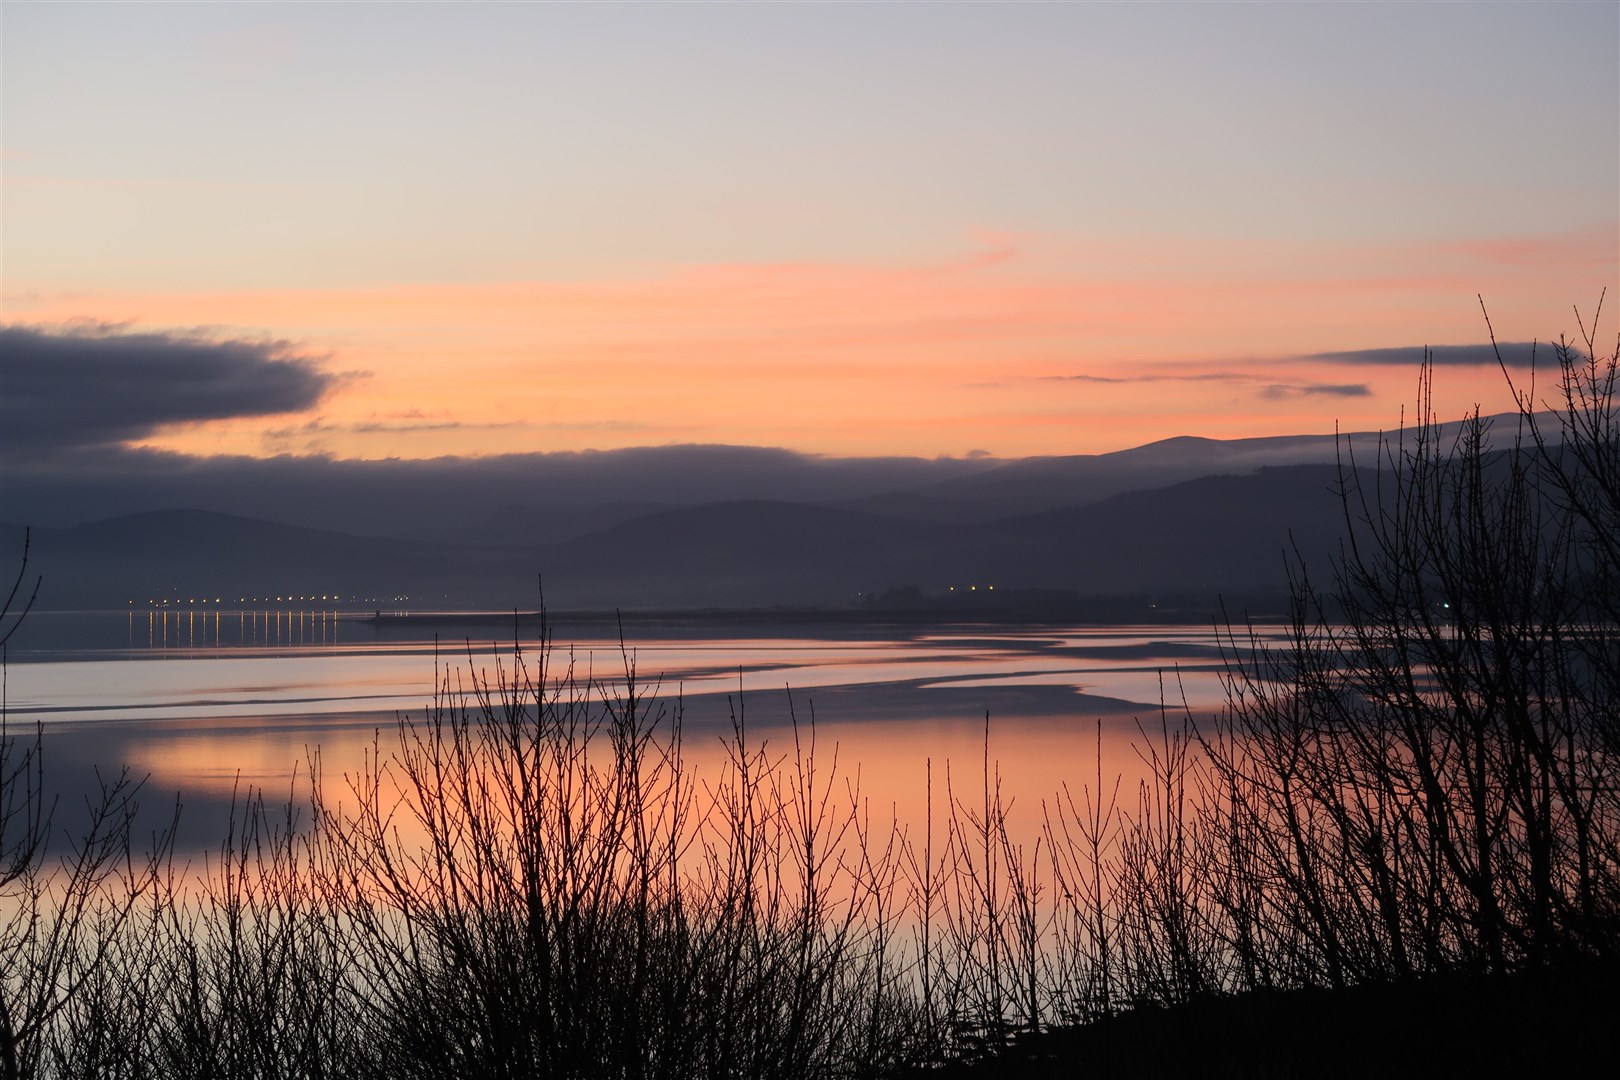 Davine Sutherland of Invergordon caught this image of a Cromarty Firth sunset